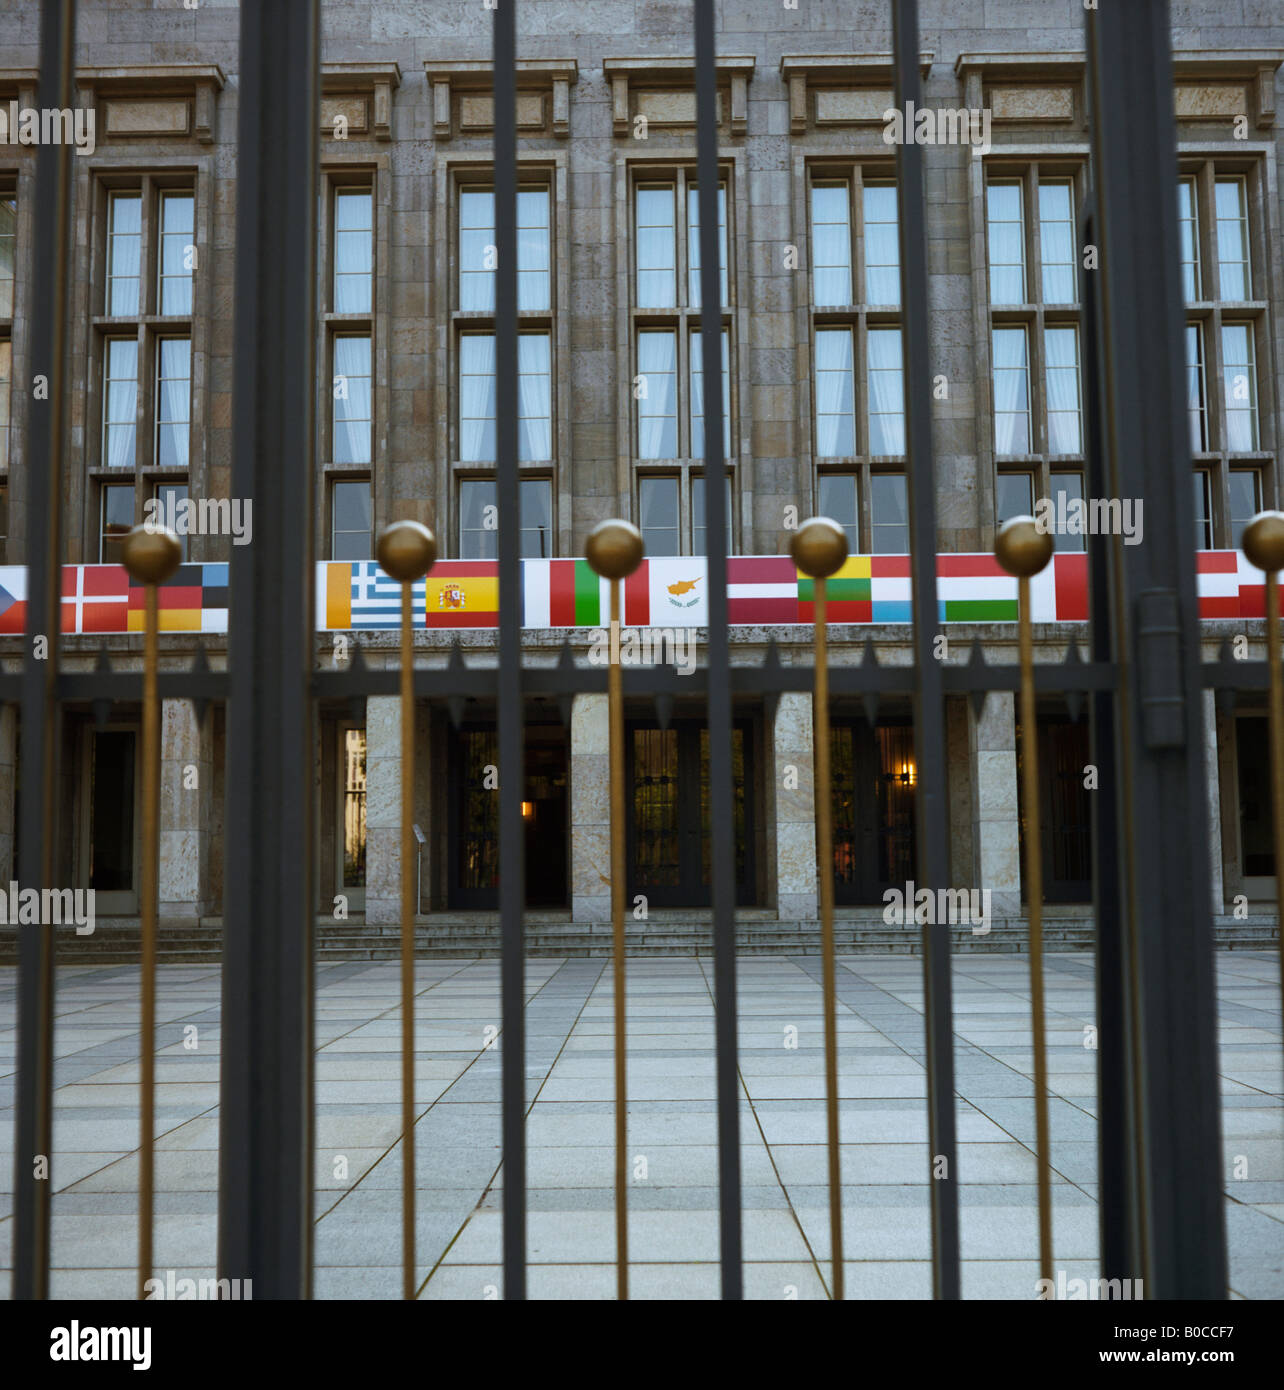 Germany, Berlin, Government building with flags seen from gates Stock Photo